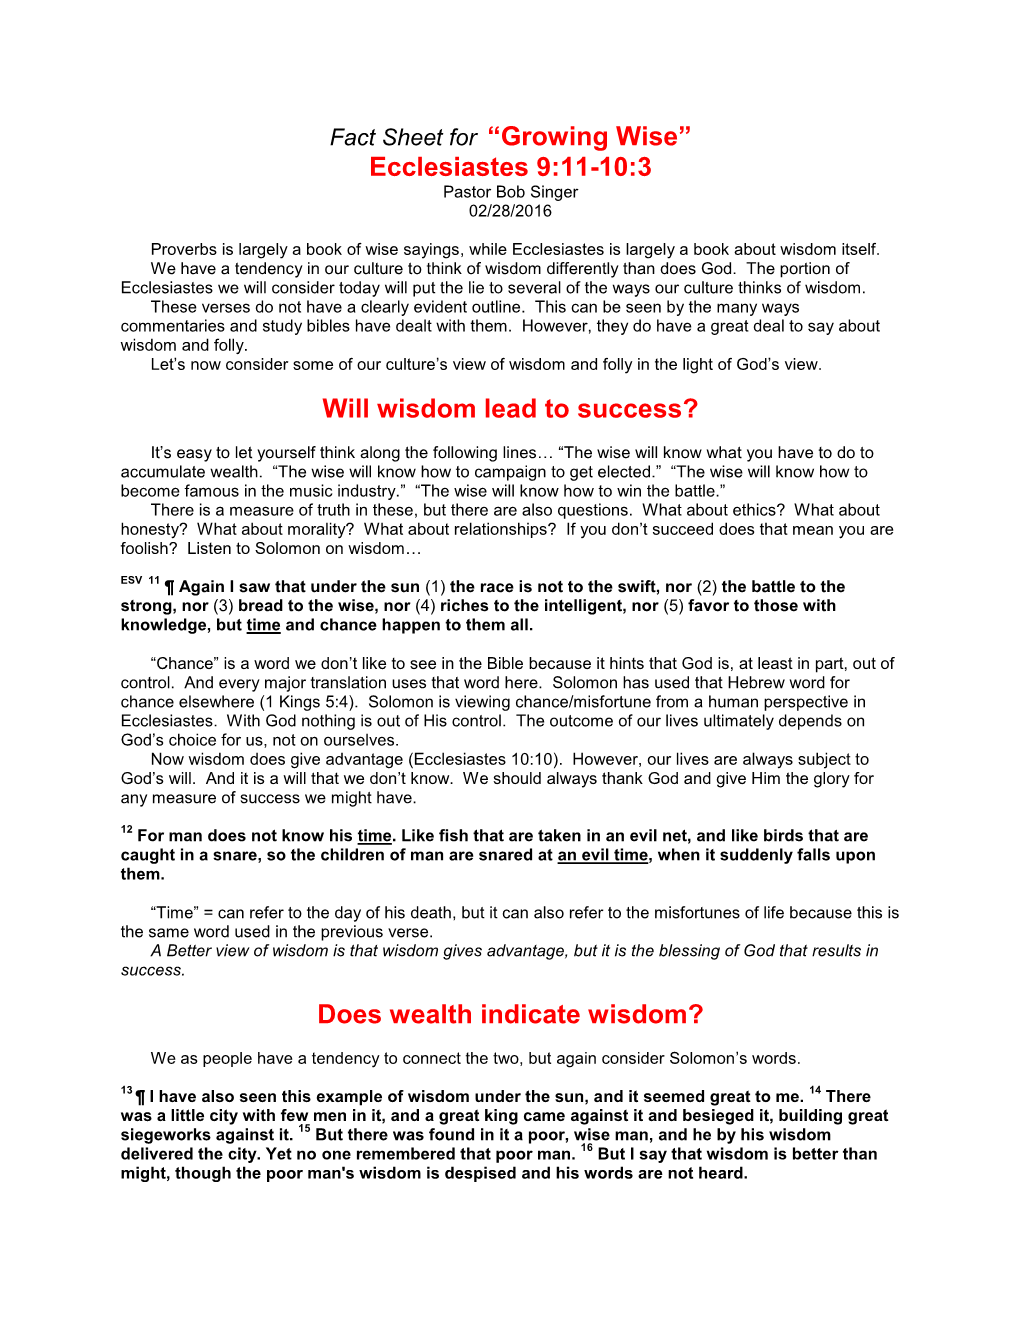 Fact Sheet for “Growing Wise” Ecclesiastes 9:11-10:3 Will Wisdom